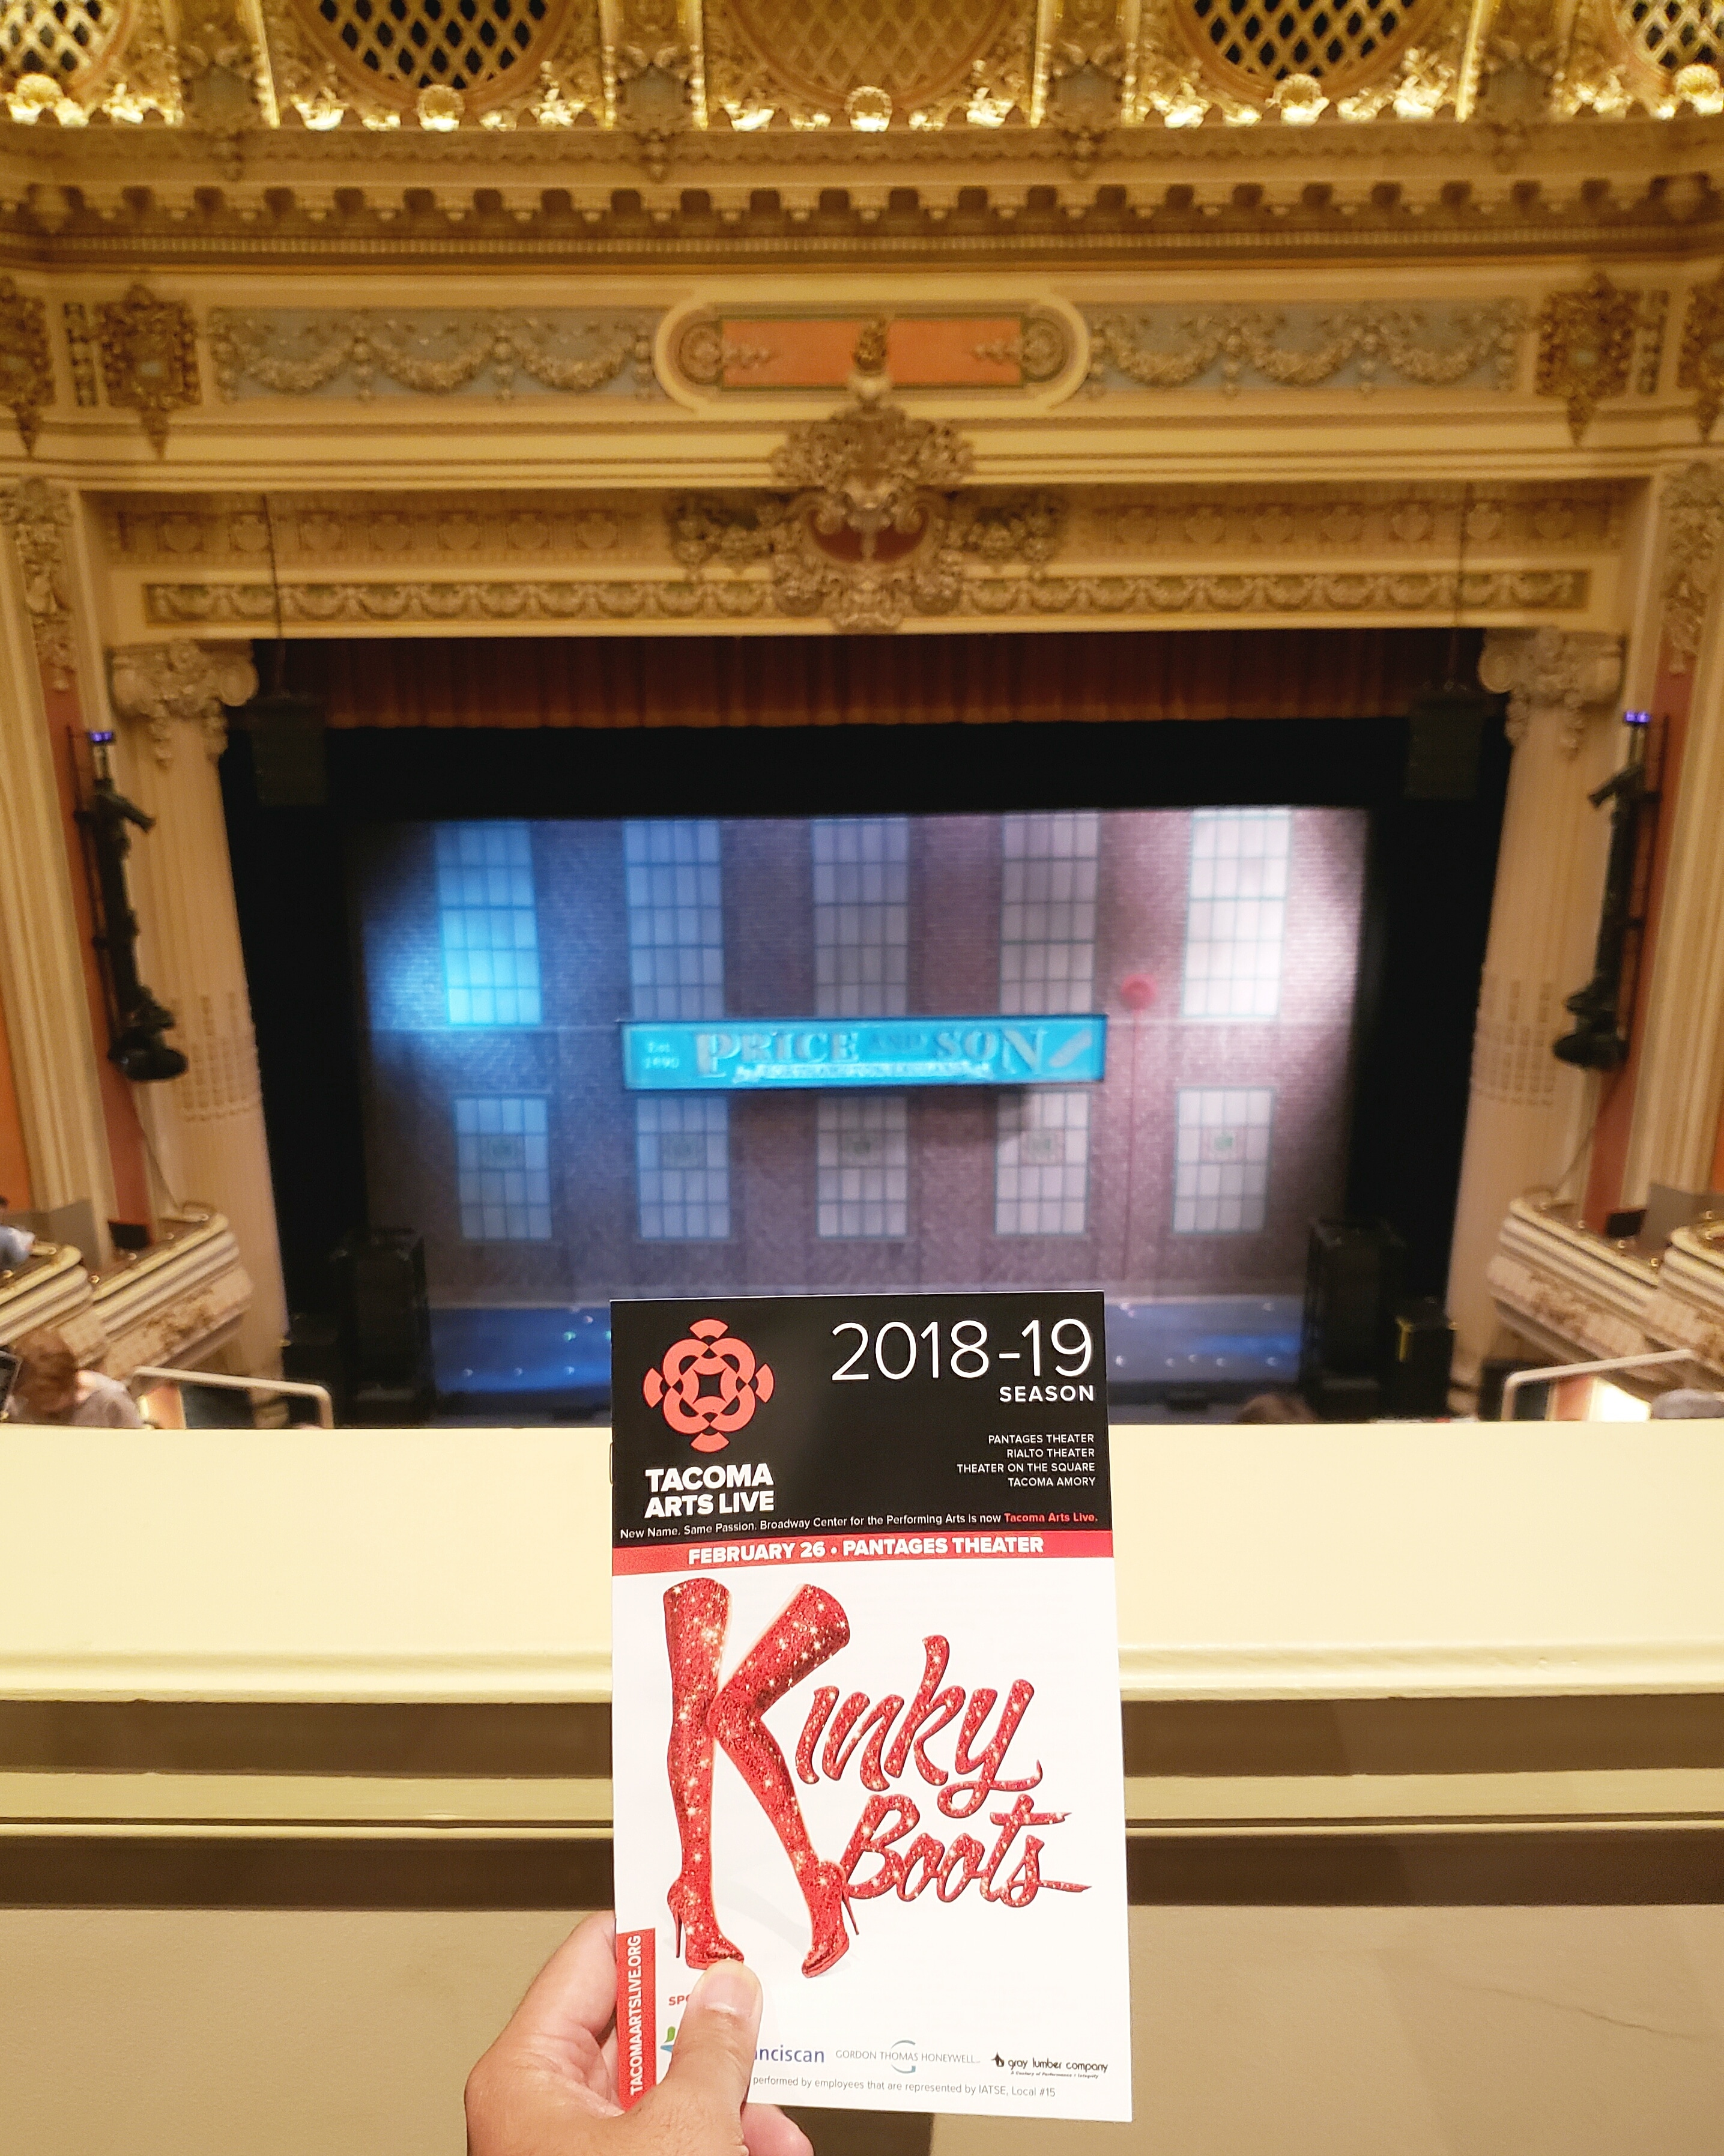 #OneNightOnly #primeSeats to @KinkyBootsBway national #tour @ #Tacoma's @TacomaArtsLive #Pantages Theater. #Fabulous #fun musical about #dragQueens. Those dudes could sing high & kick even higher! But the show was #loud, more than #Paramount Theatre! #drag #sopranos